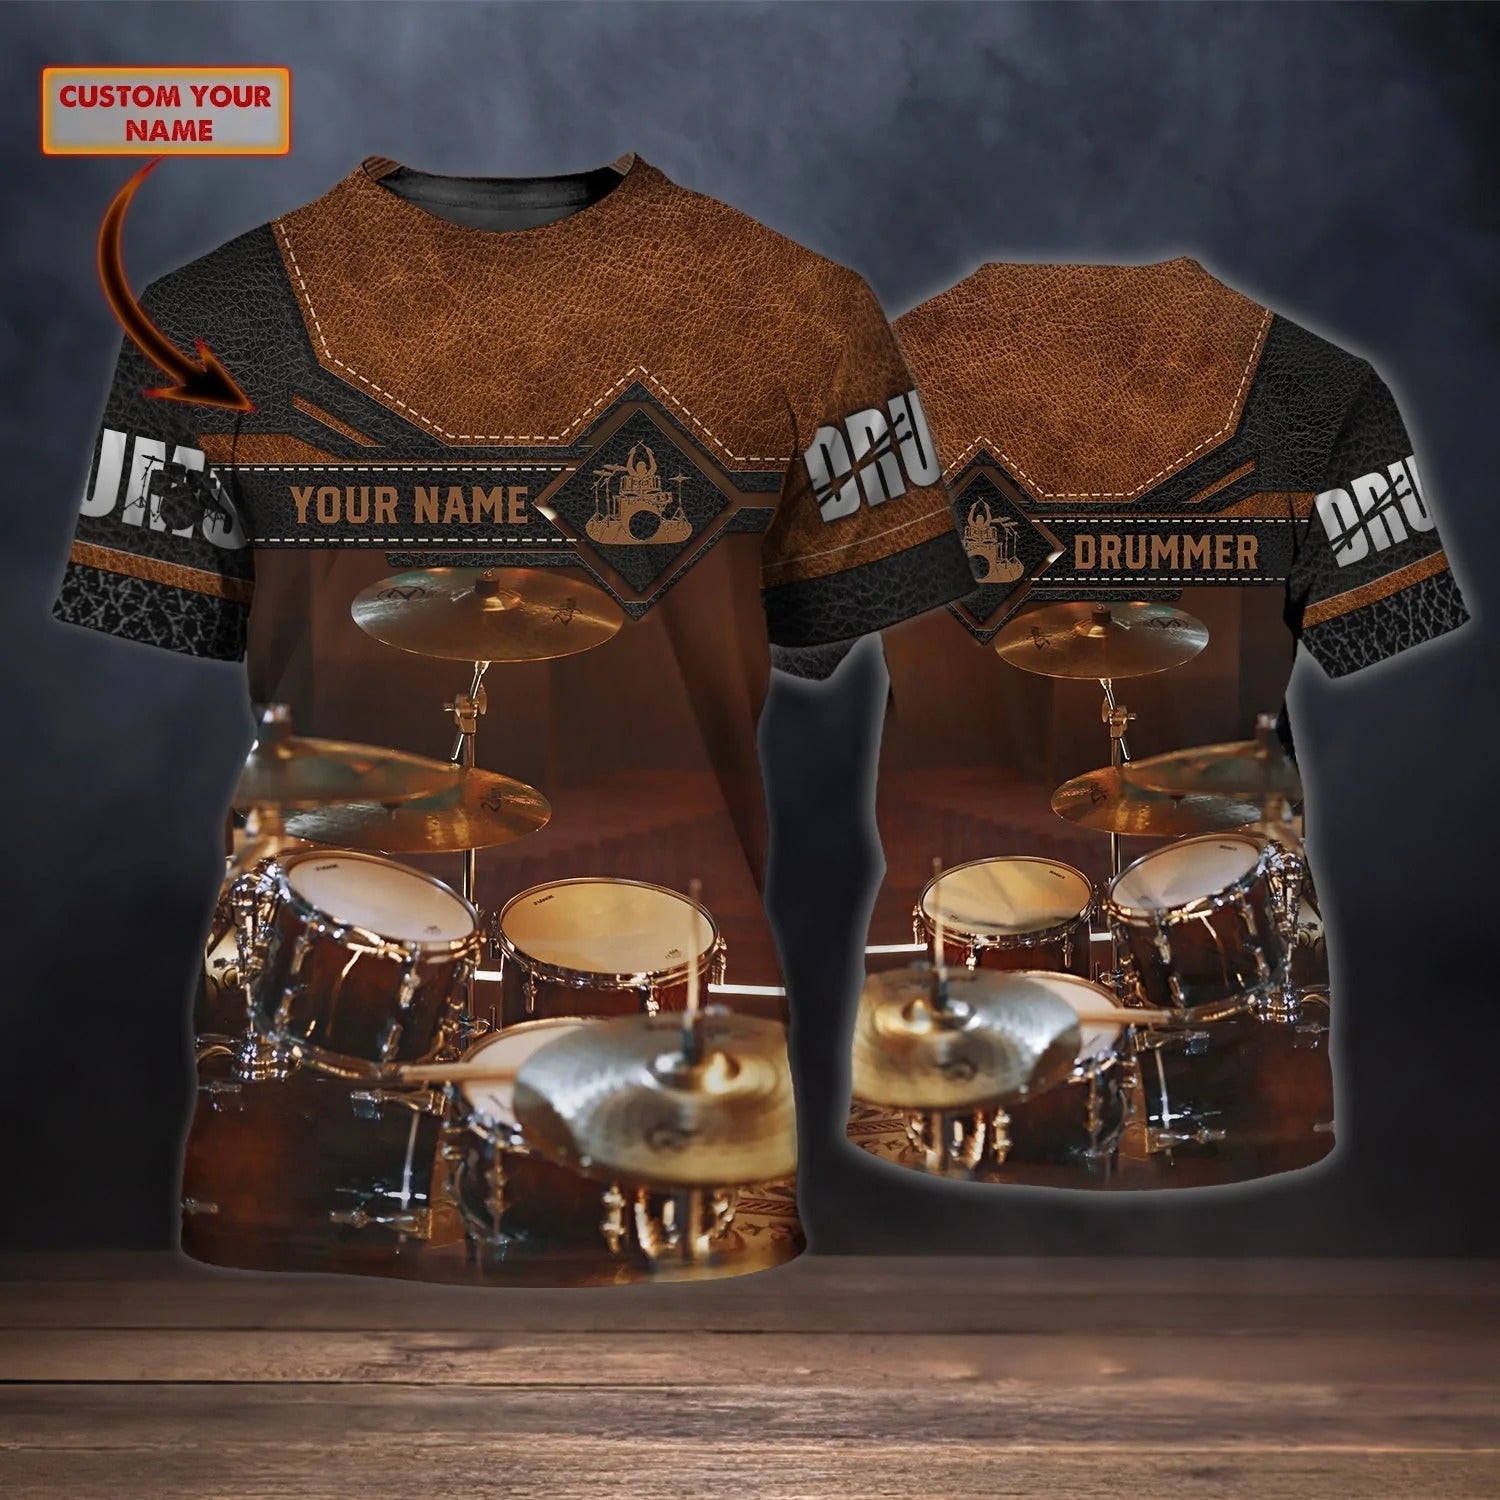 3D Print Brown T Shirt For A Drummer/ Drum Print On Shirt Leather Pattern/ Custom Shirt For A Drummer